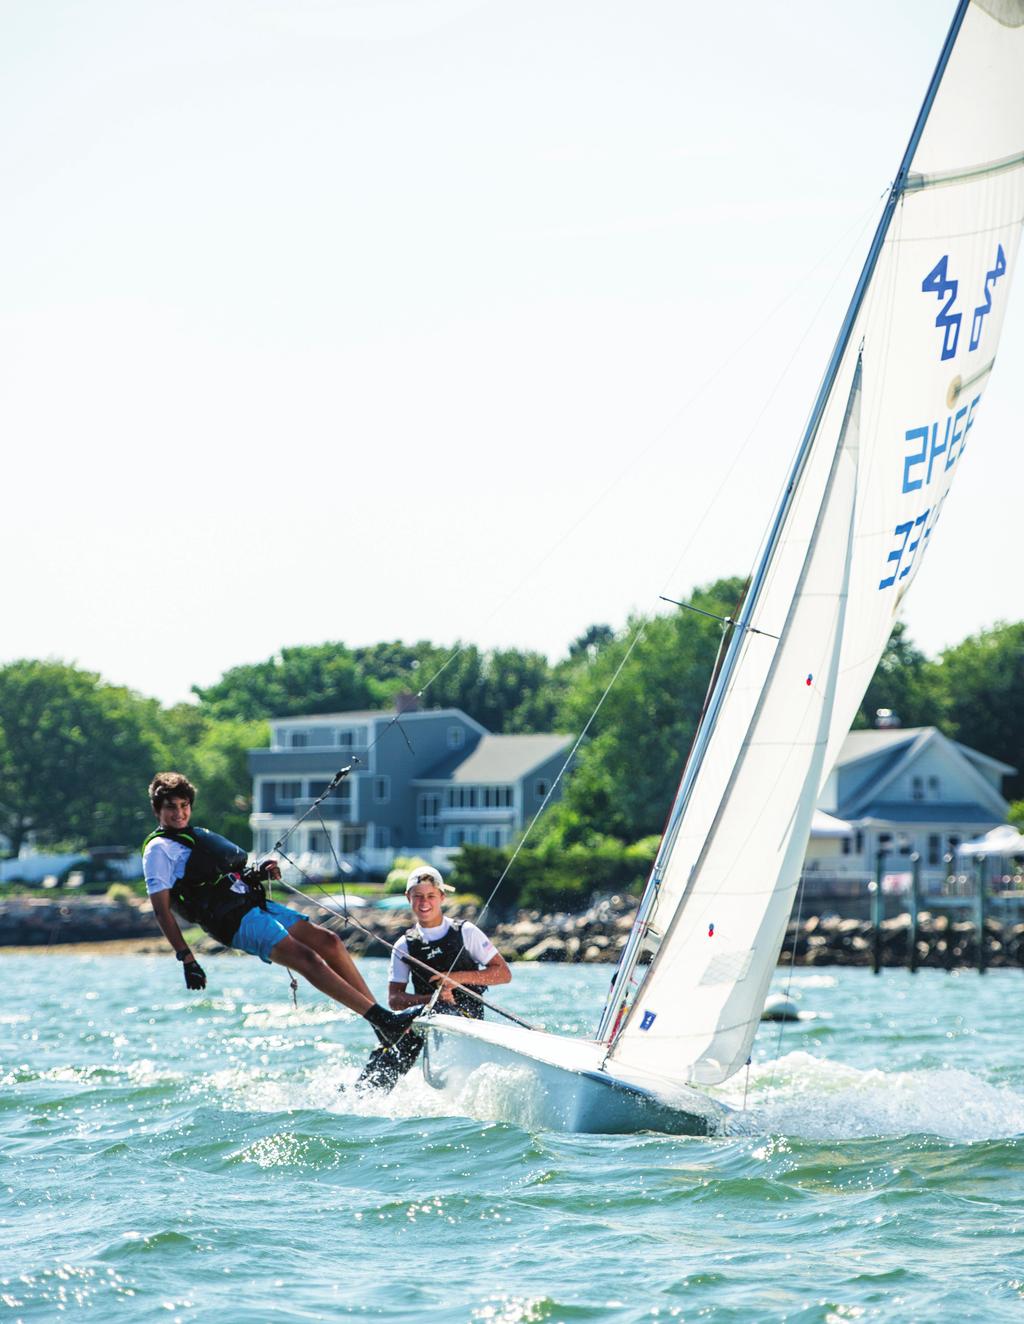 WindCheck Advertising Information 2019 In Print & Social: WindCheck reaches more sailors from New York to Cape Cod than any other publication.